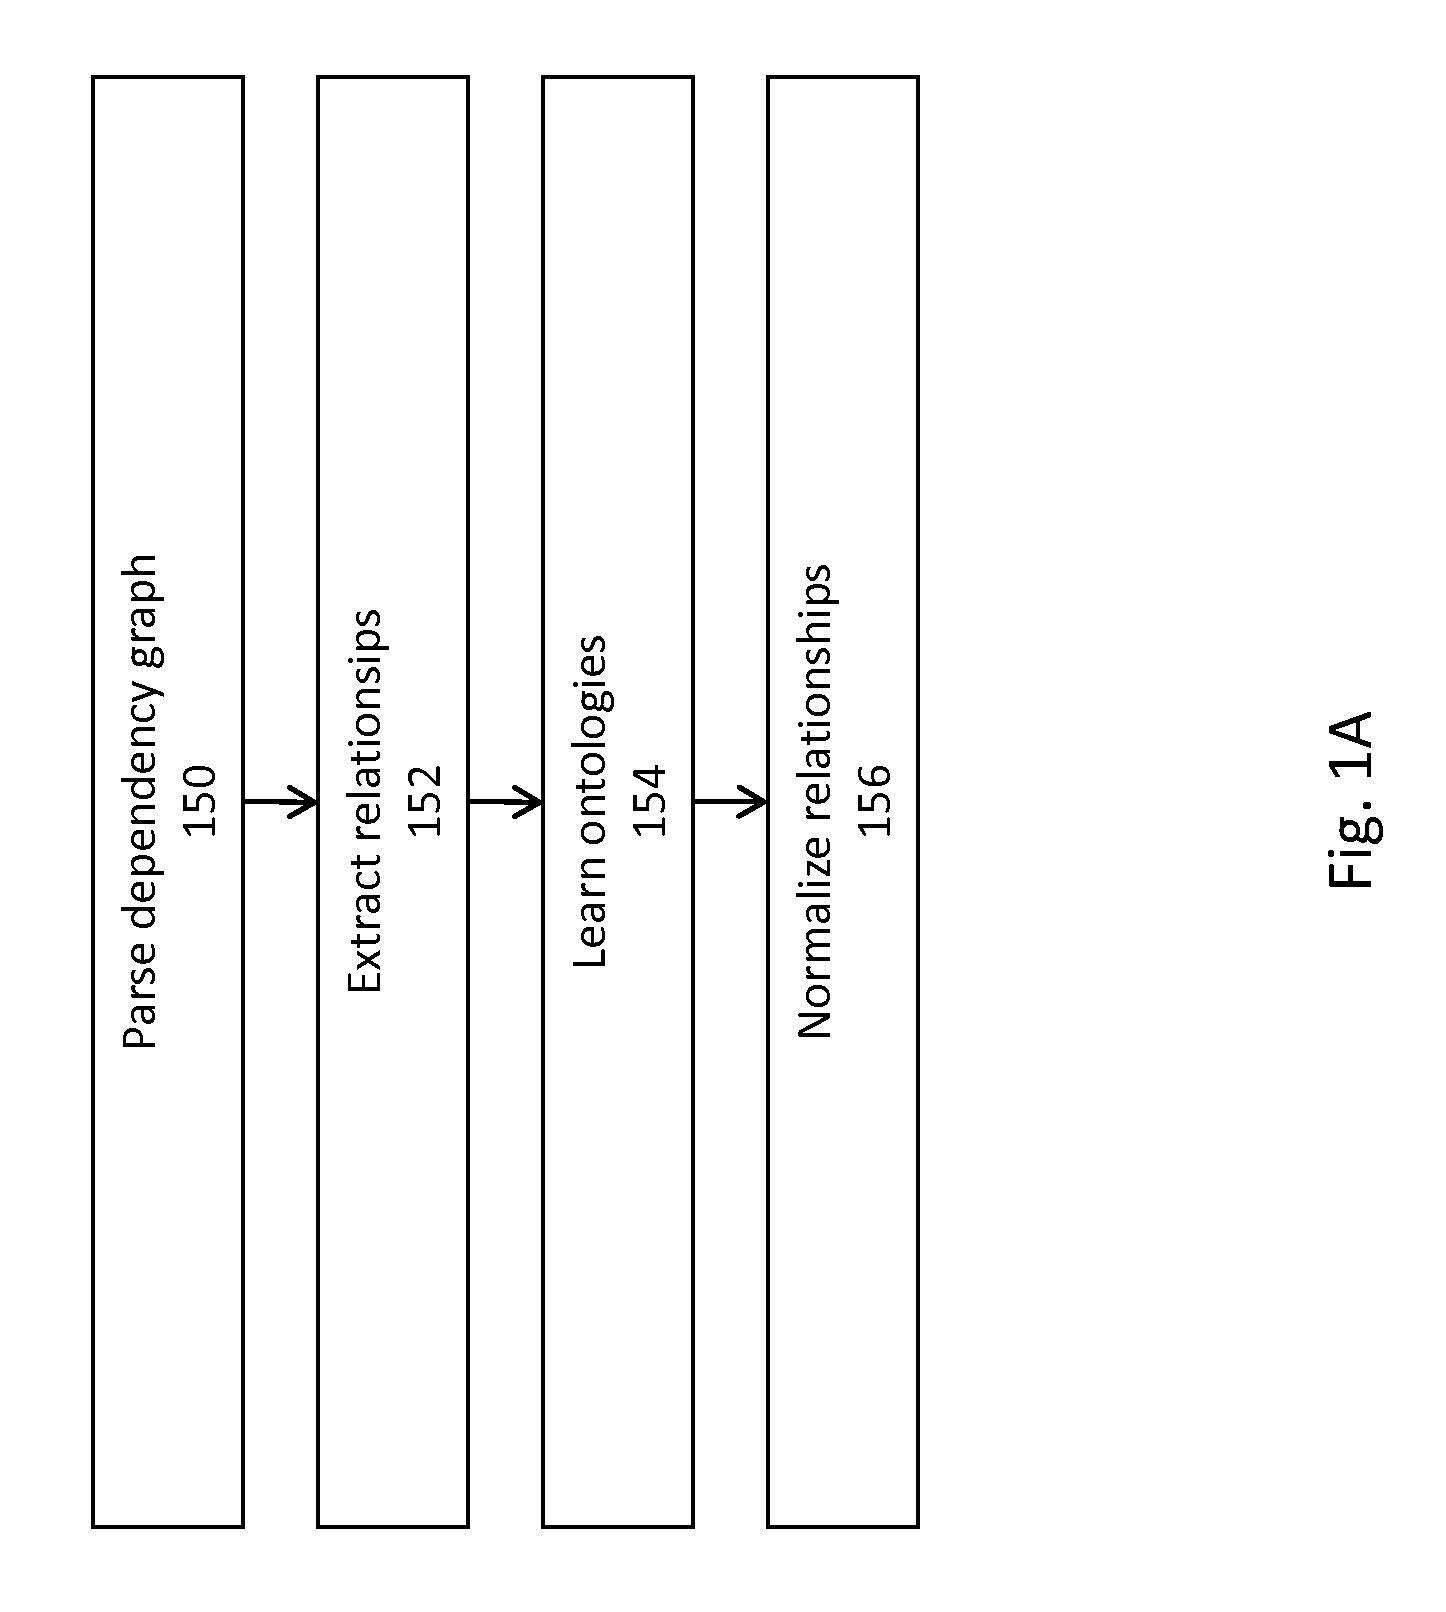 Method And System For Extraction And Normalization Of Relationships Via Ontology Induction